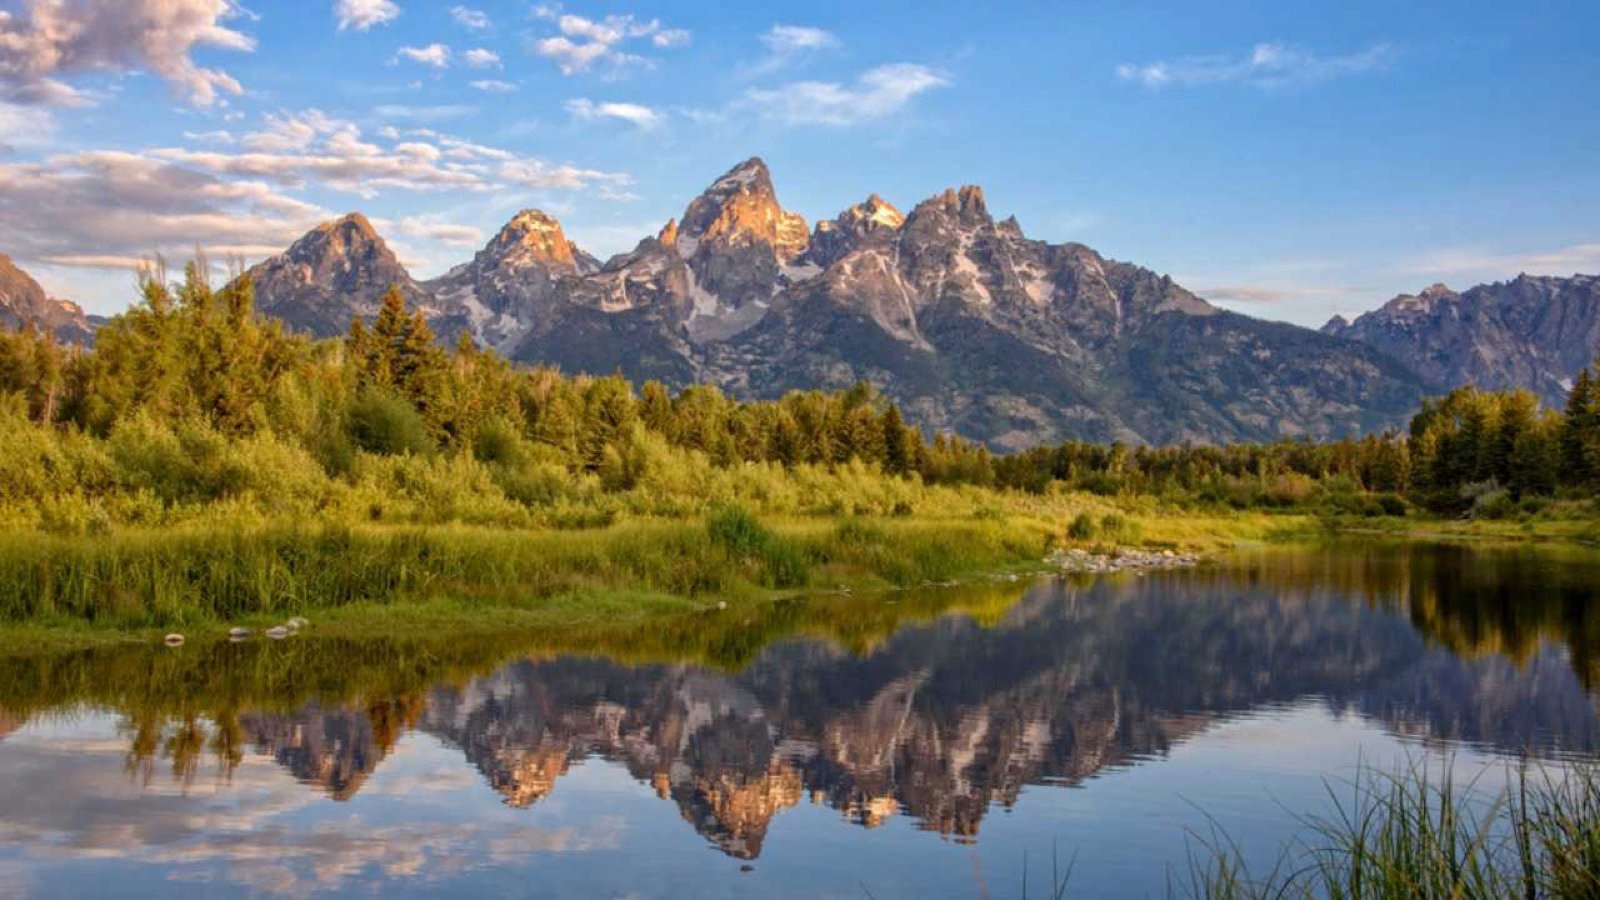 <p>Jackson Hole doesn’t sound like a nice place, but that’s not the case. This area in Wyoming has some of the most splendid mountain resorts in the country. It offers a luxury experience among some of the prettiest peaks in the world.</p><p>You can see mountain wildlife, visit the highly-rated spas, eat at fine dining locations, attend rodeos, and more. The town is filled with adventure but also has art galleries, stores, and other in-town amenities for couples who want a calmer vacation.</p>